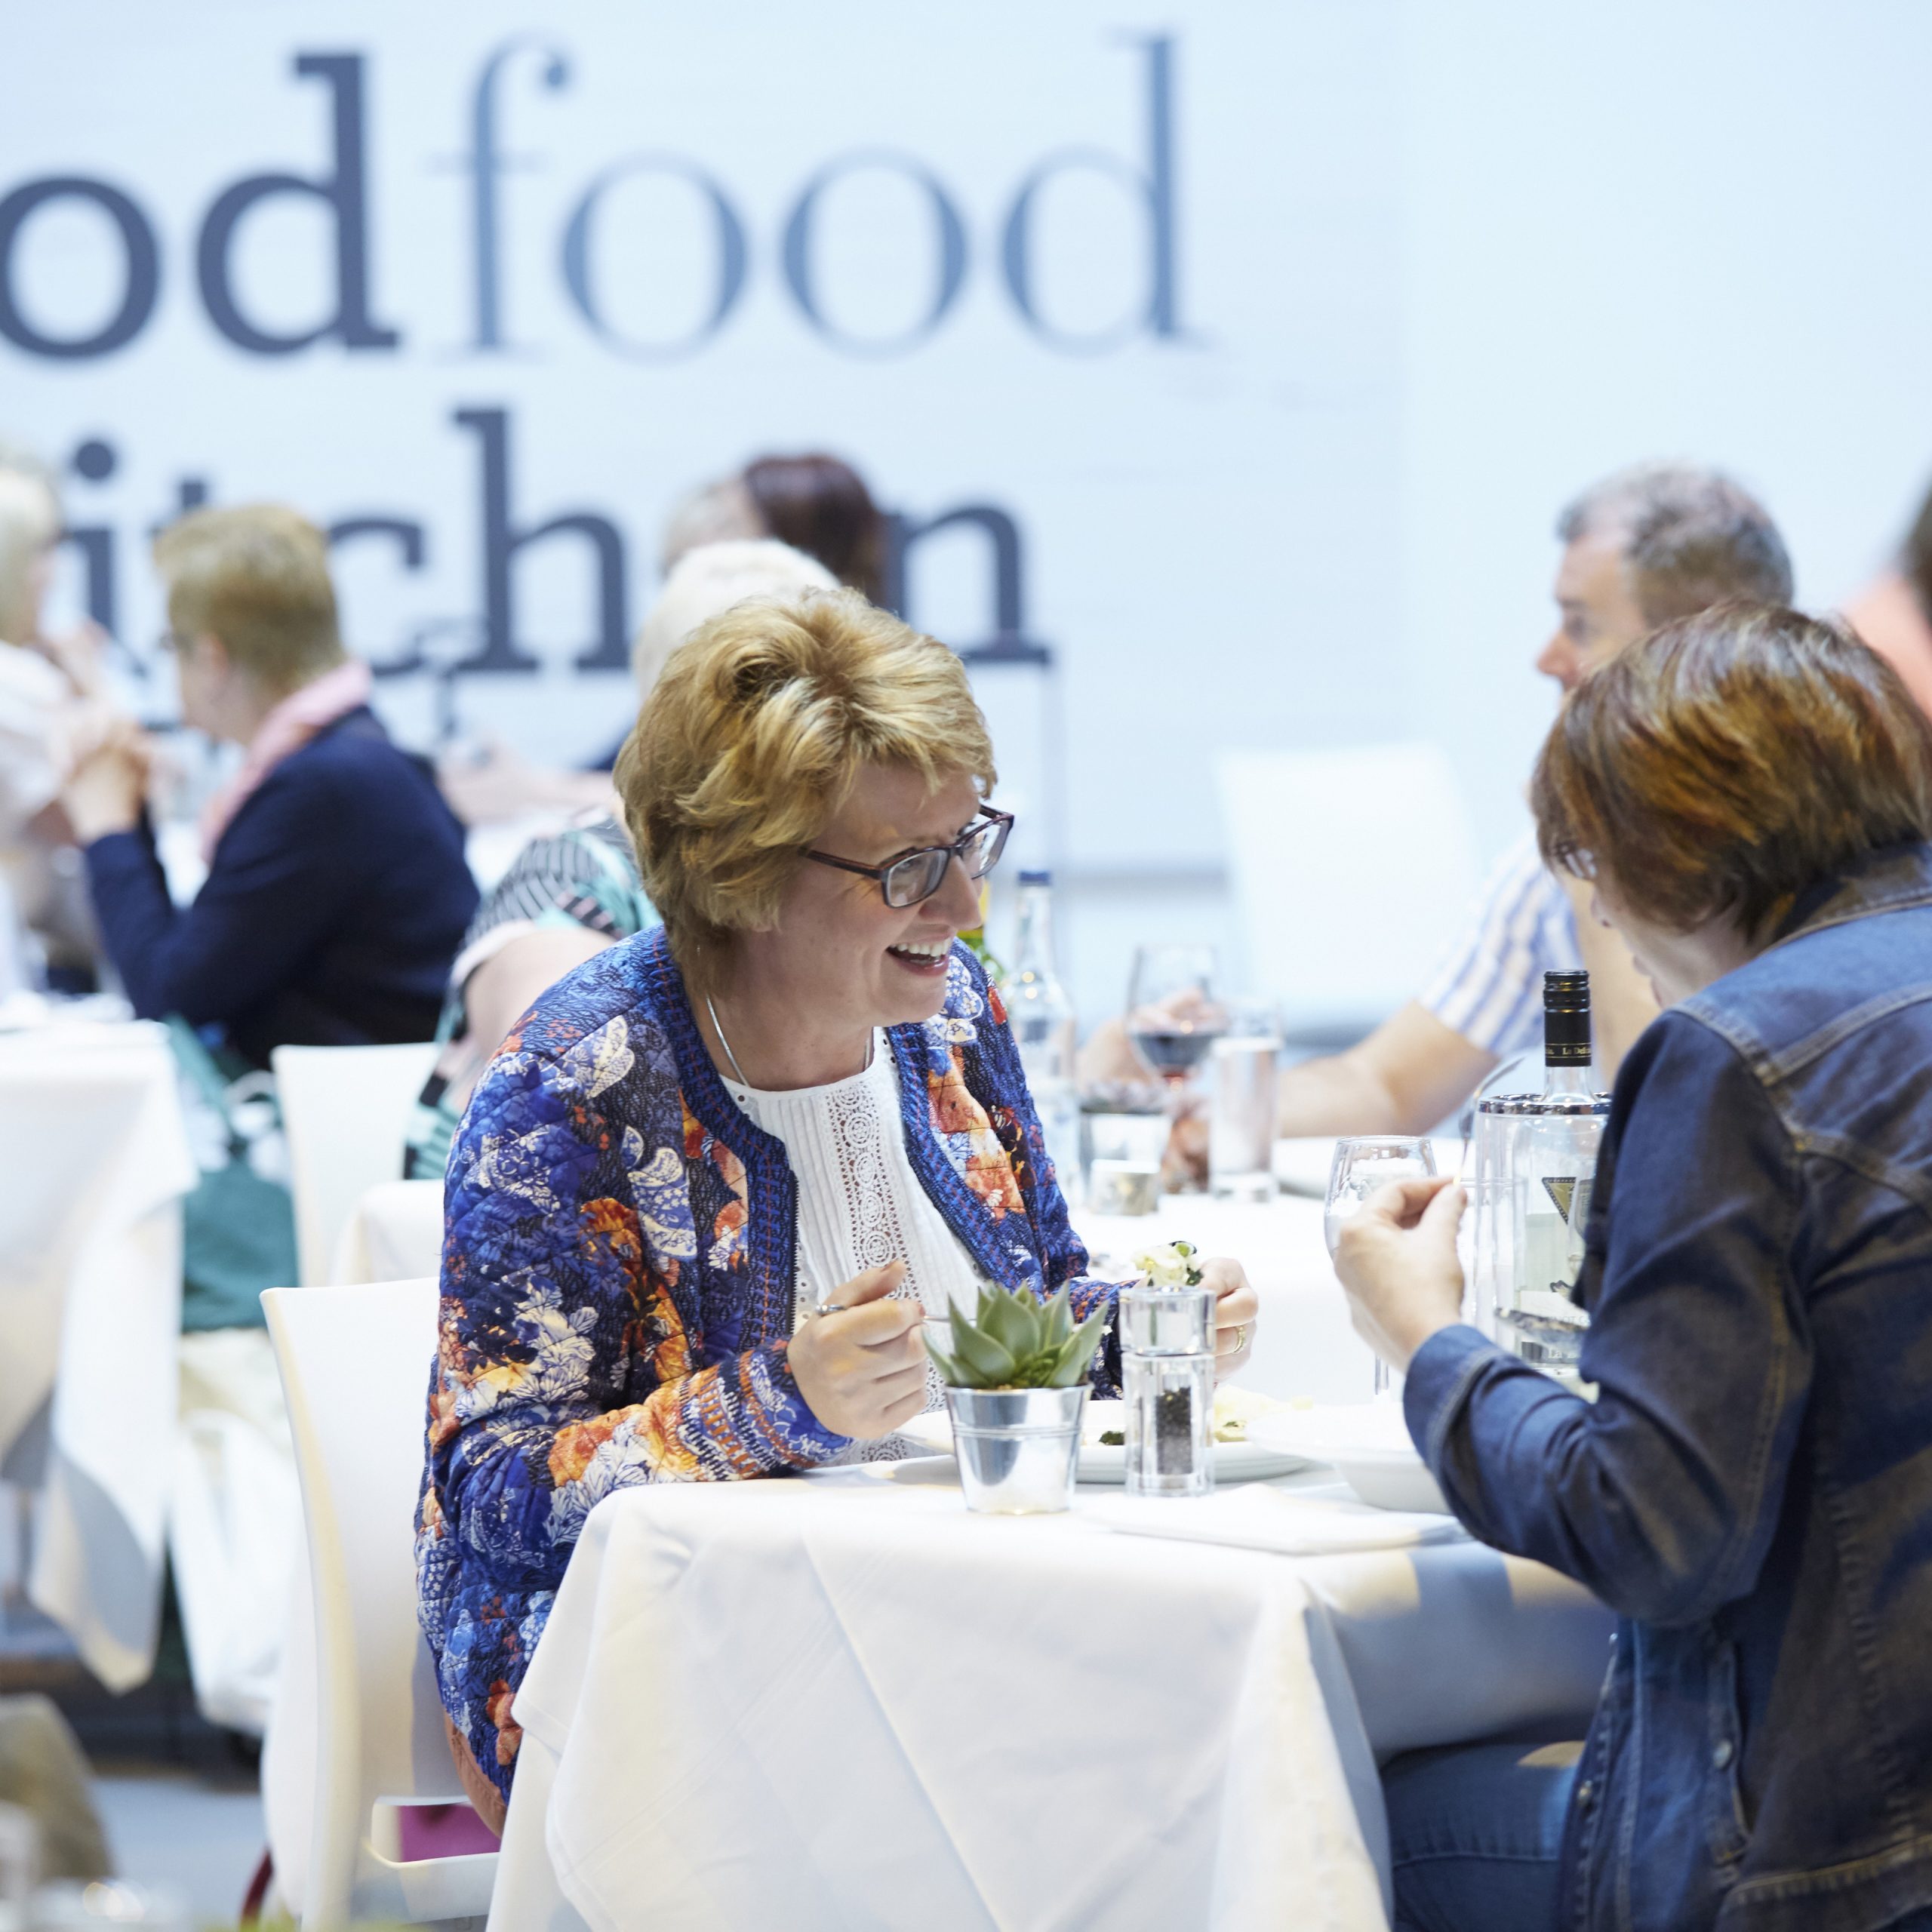 Two women enjoying their food at the BBC Good Food Restaurant. Click to find out more